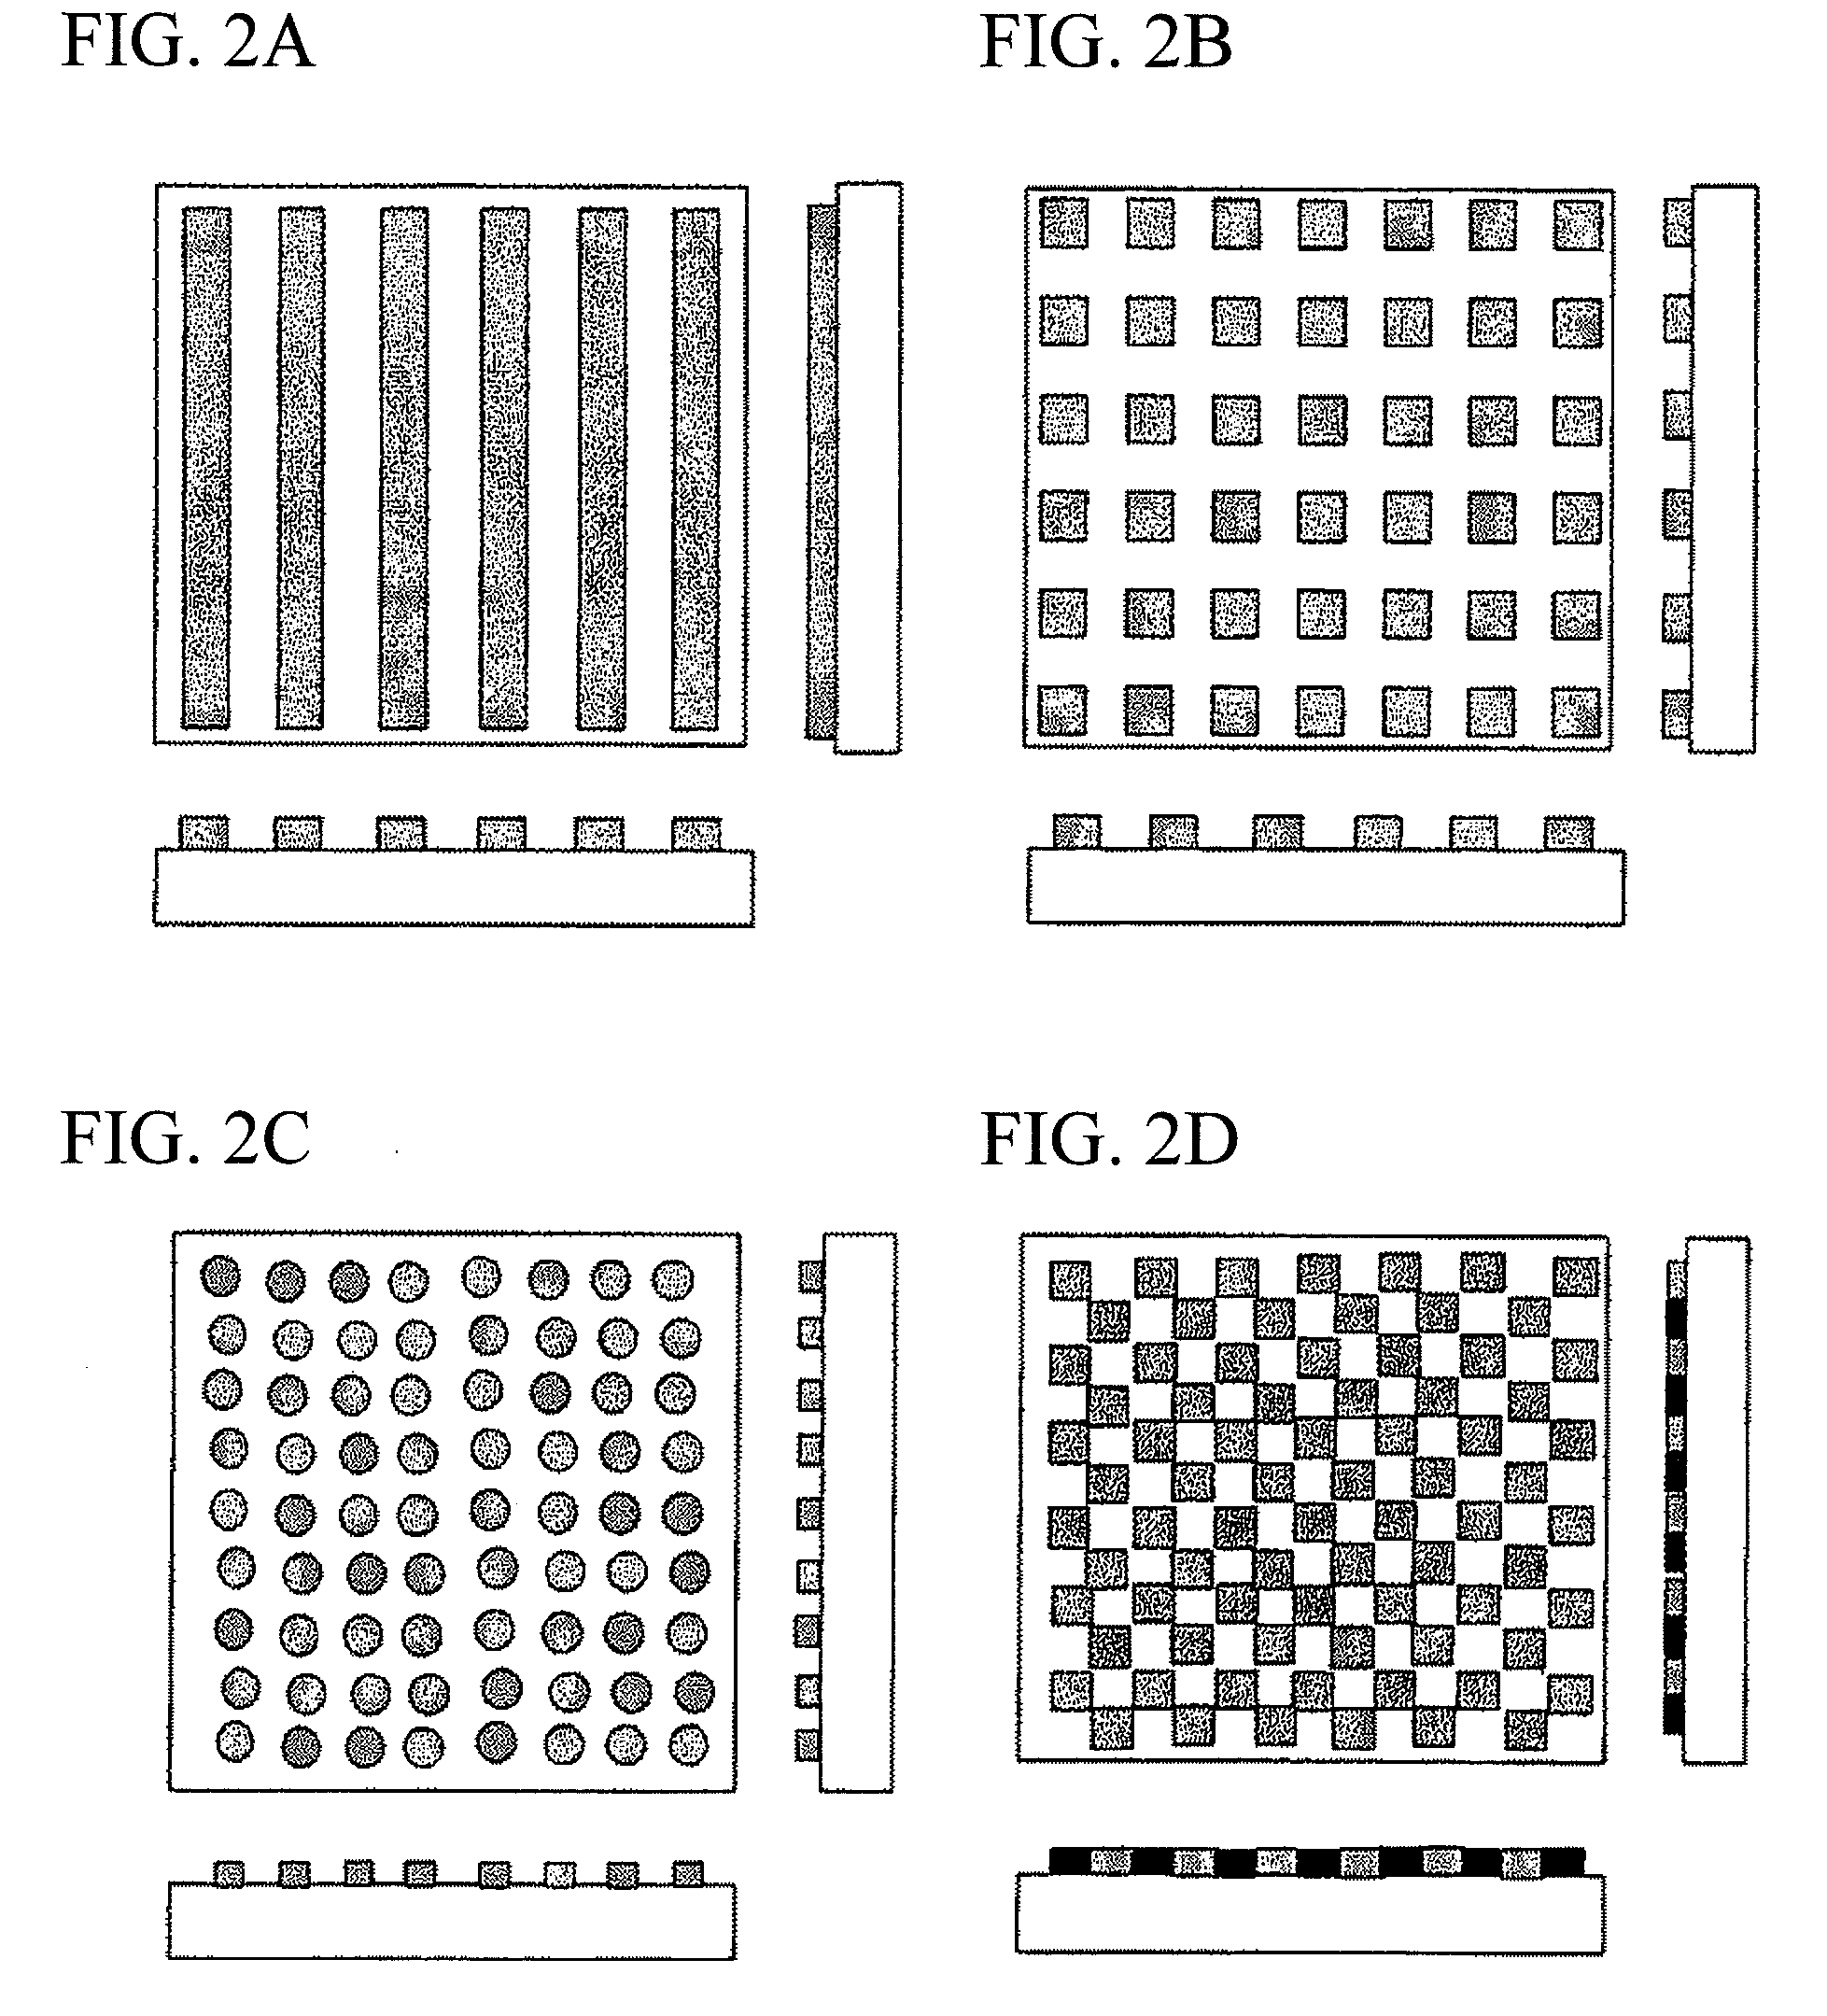 Photovoltaic Cells and Manufacture Method